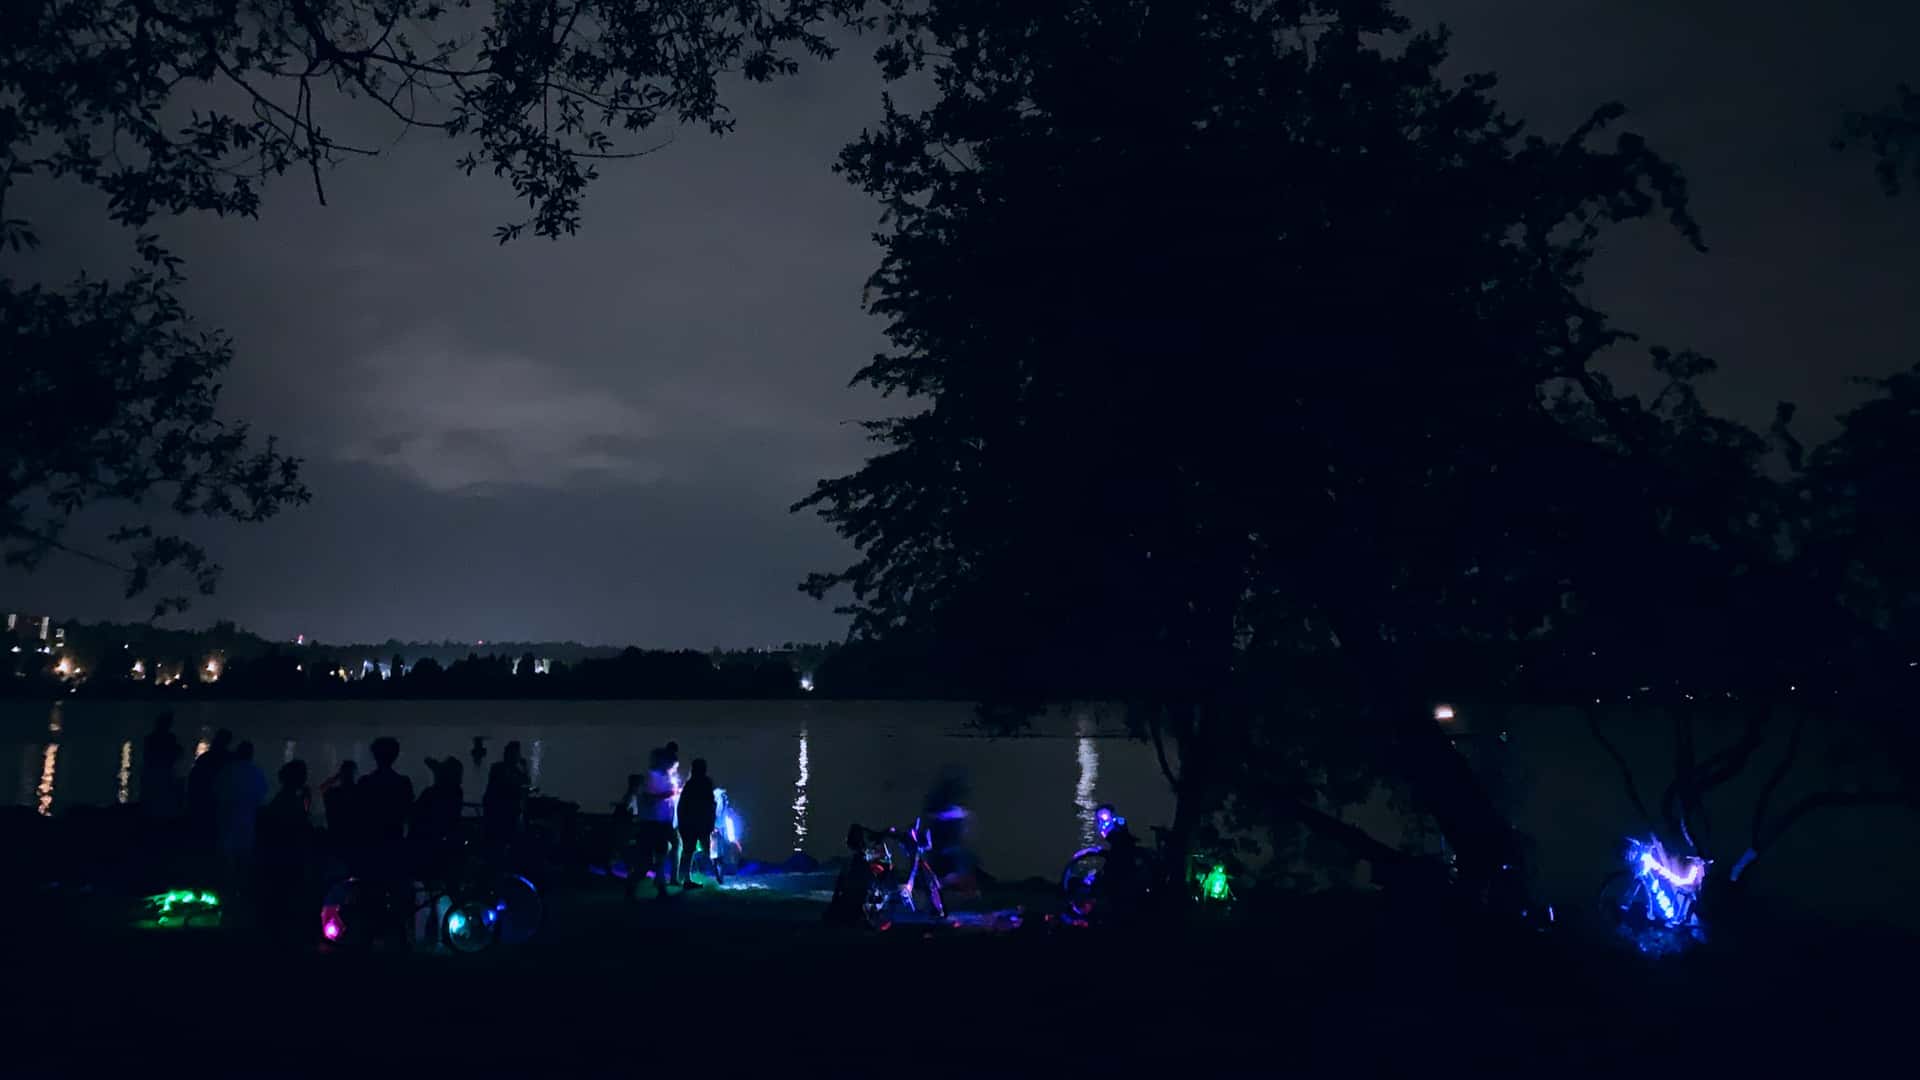 cyclists dancing in a park at night